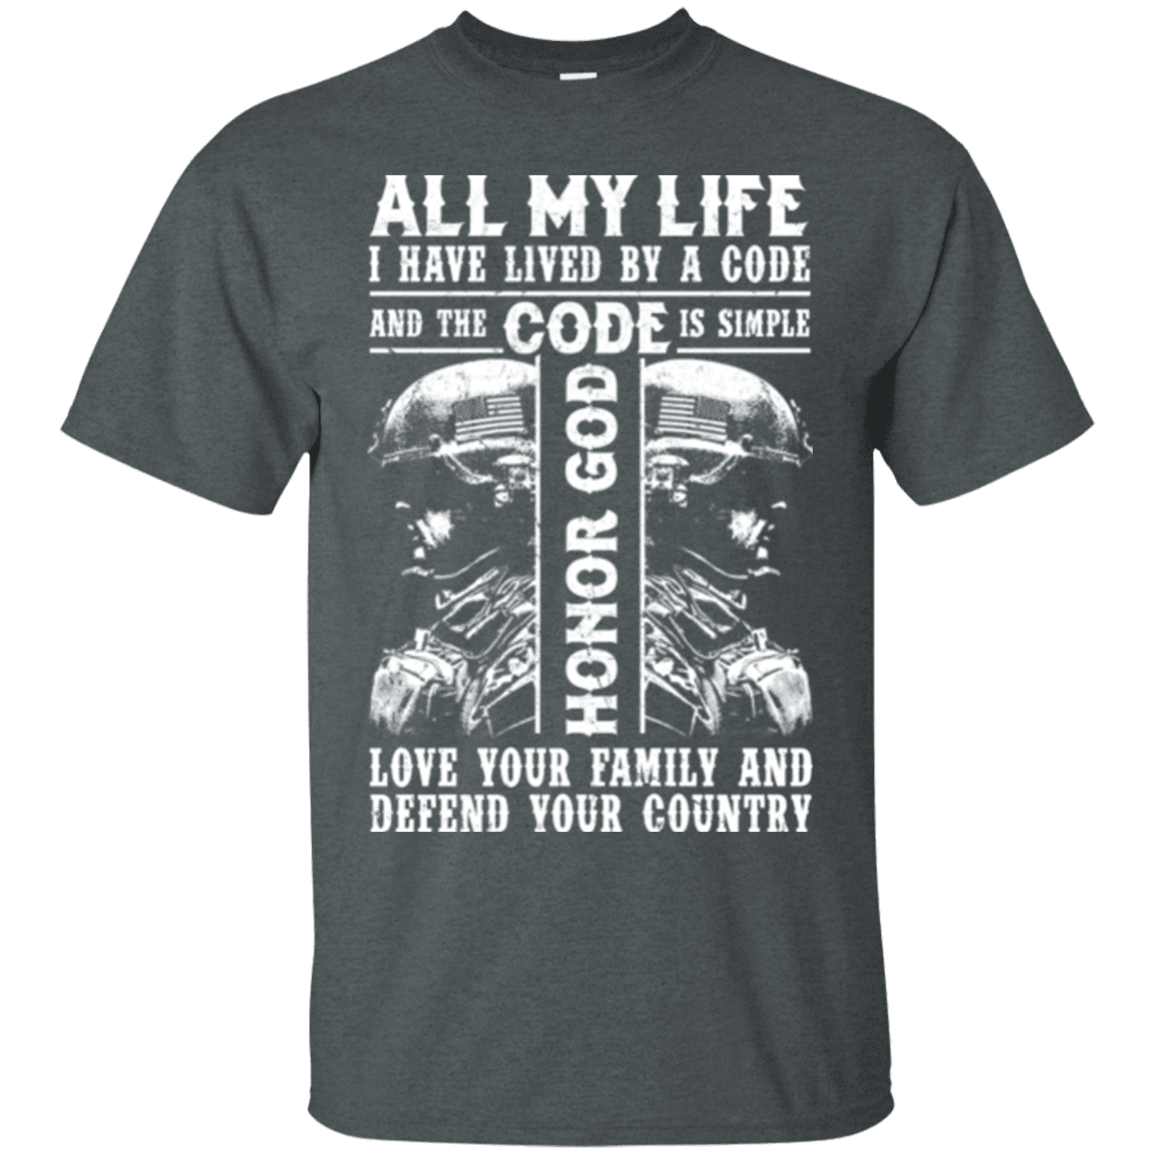 Military T-Shirt "HONOR GOD LOVE FAMILY AND DEFEND YOUR COUNTRY VETERAN"-TShirt-General-Veterans Nation